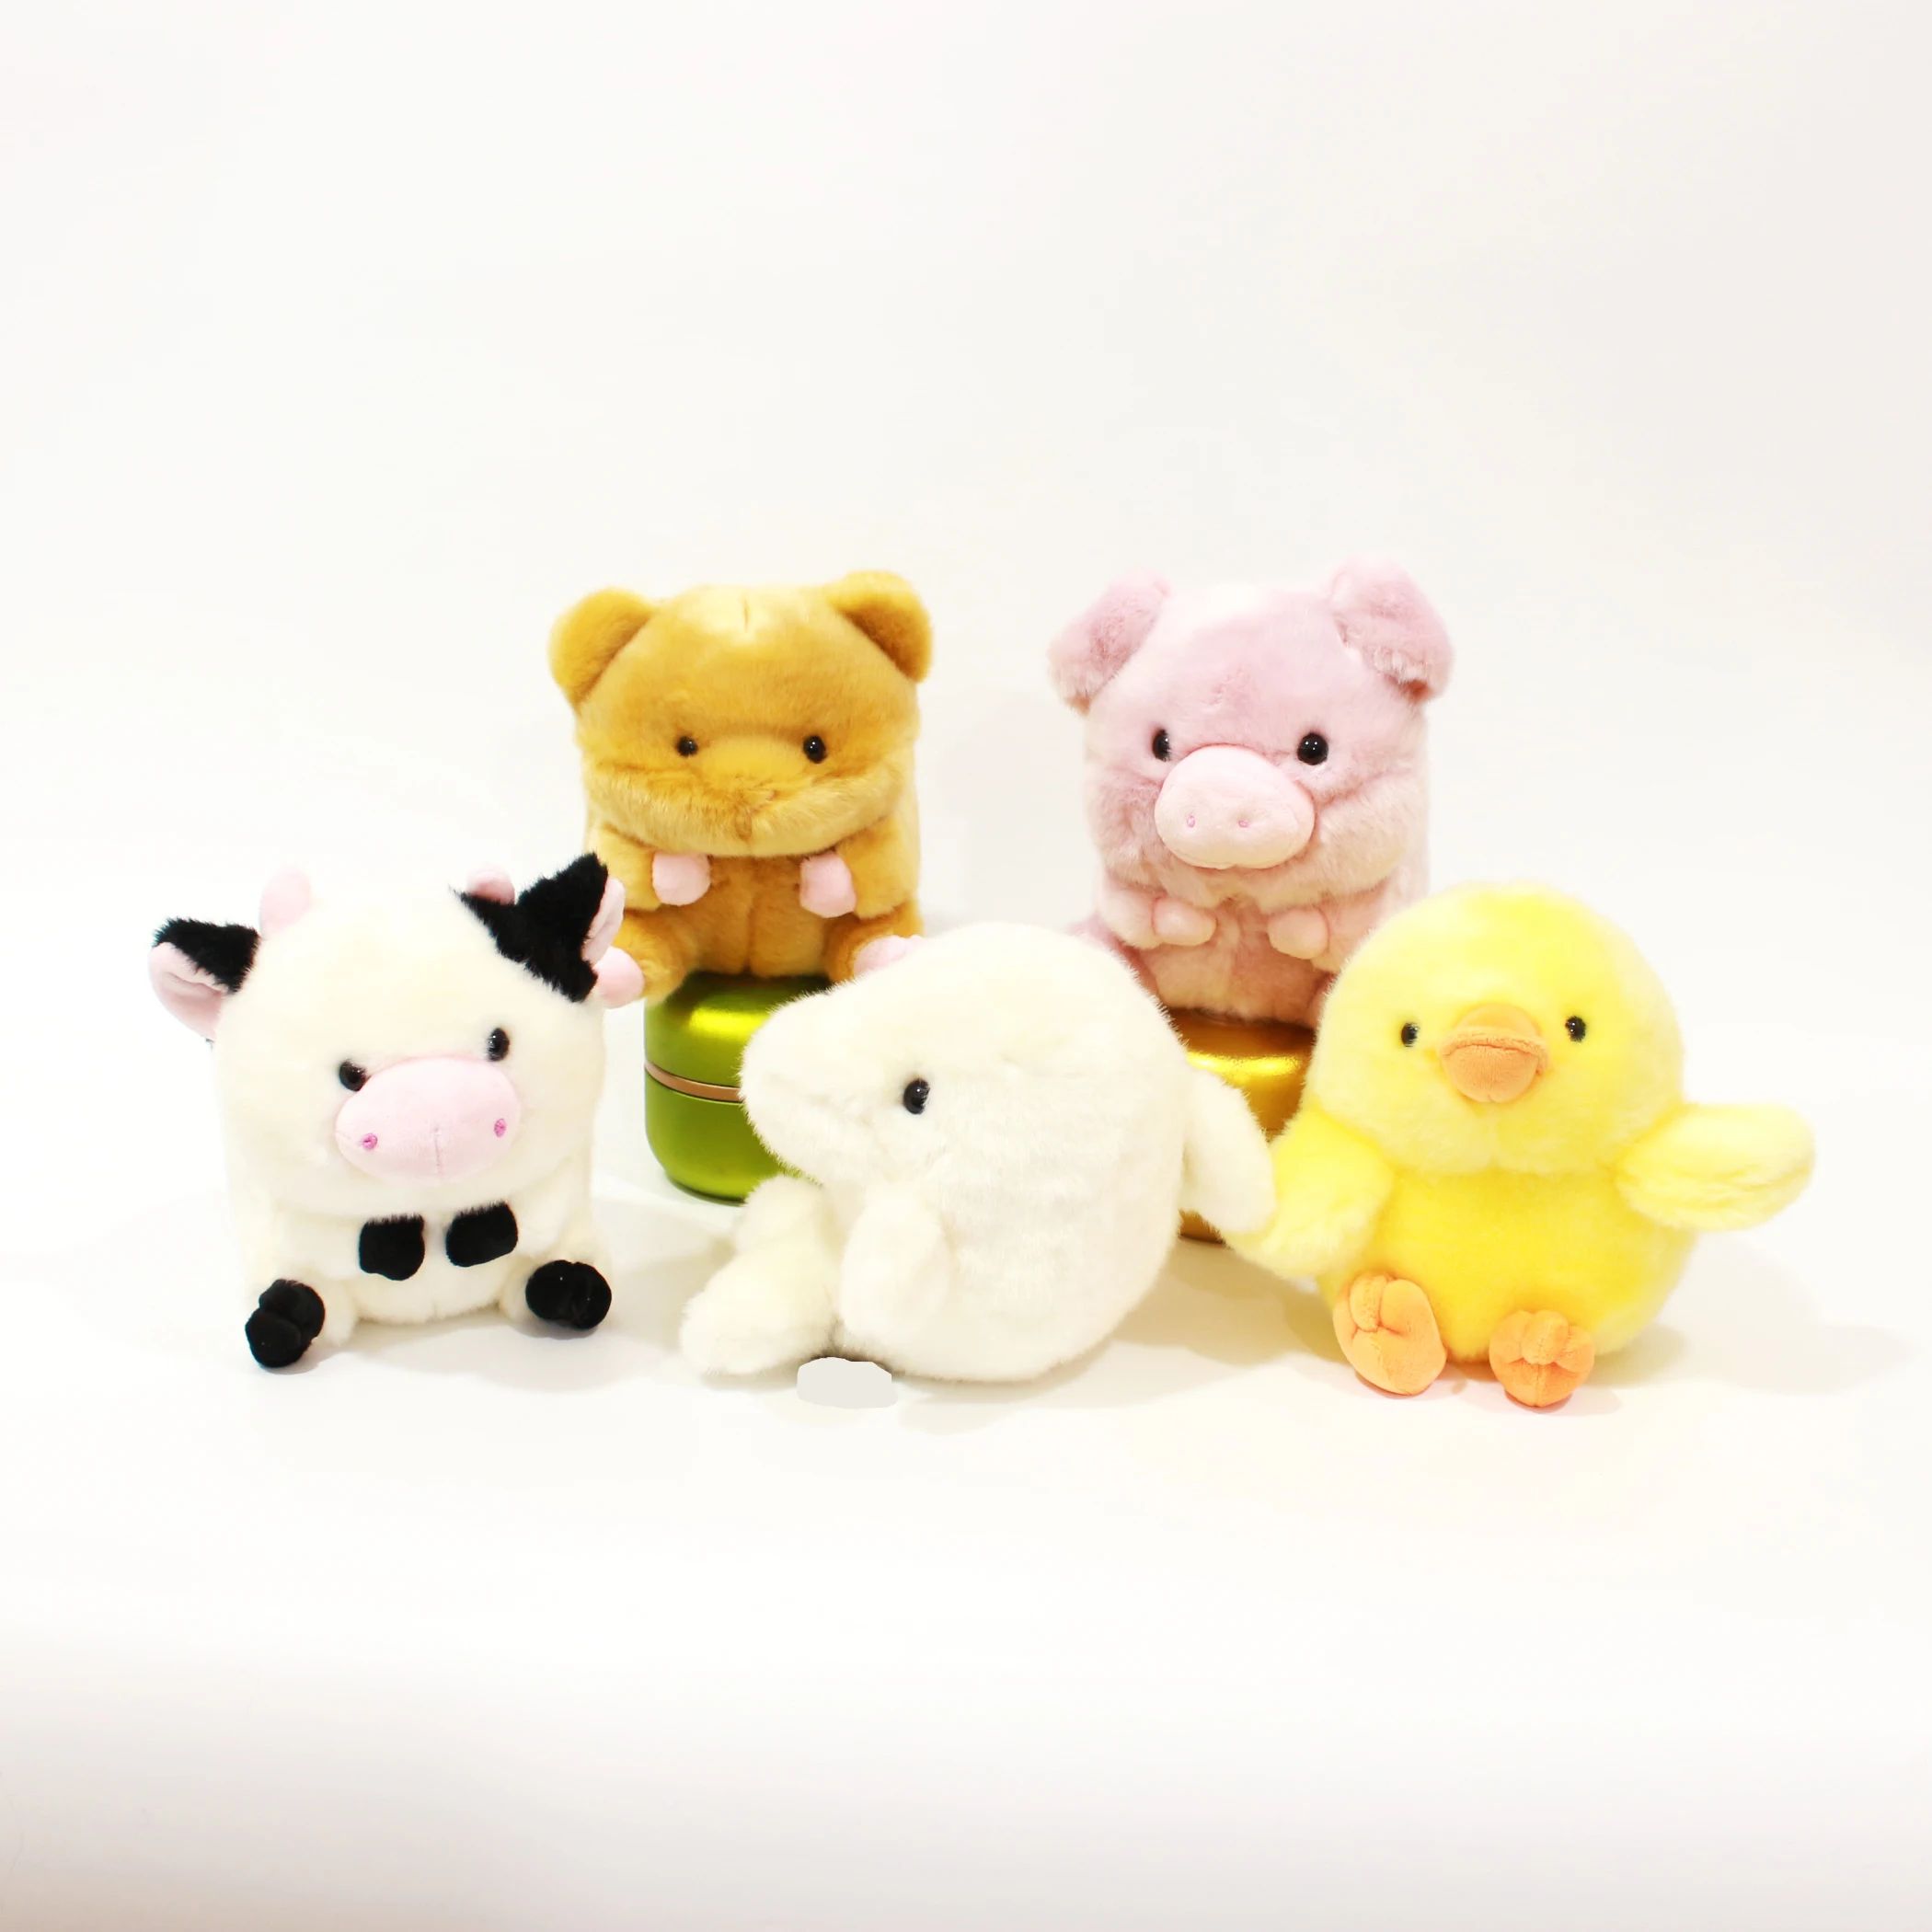 Wholesale Super Cute Small Animals Plush Toy Dolls - Buy Stuffed Plush  Animal,Toys And Dolls,Animal Toy Doll Product on 